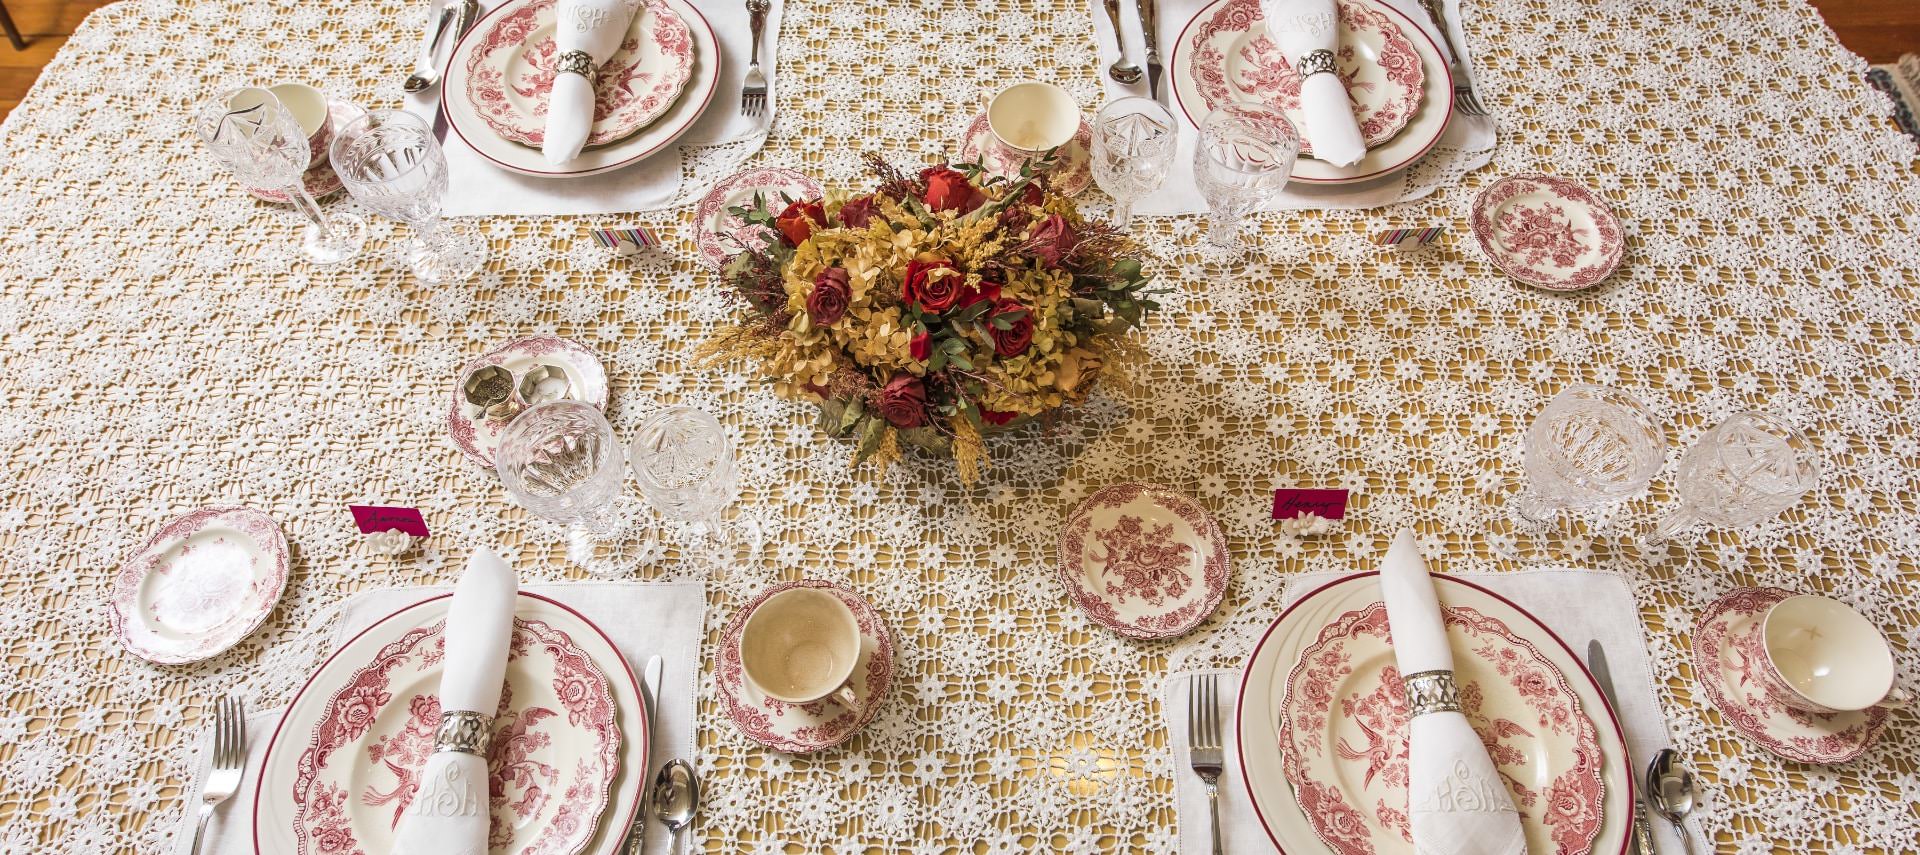 Dining table with delicate knitted tablecloth, Victorian red and white China plates, folded napkins, and red and yellow flower arrangement